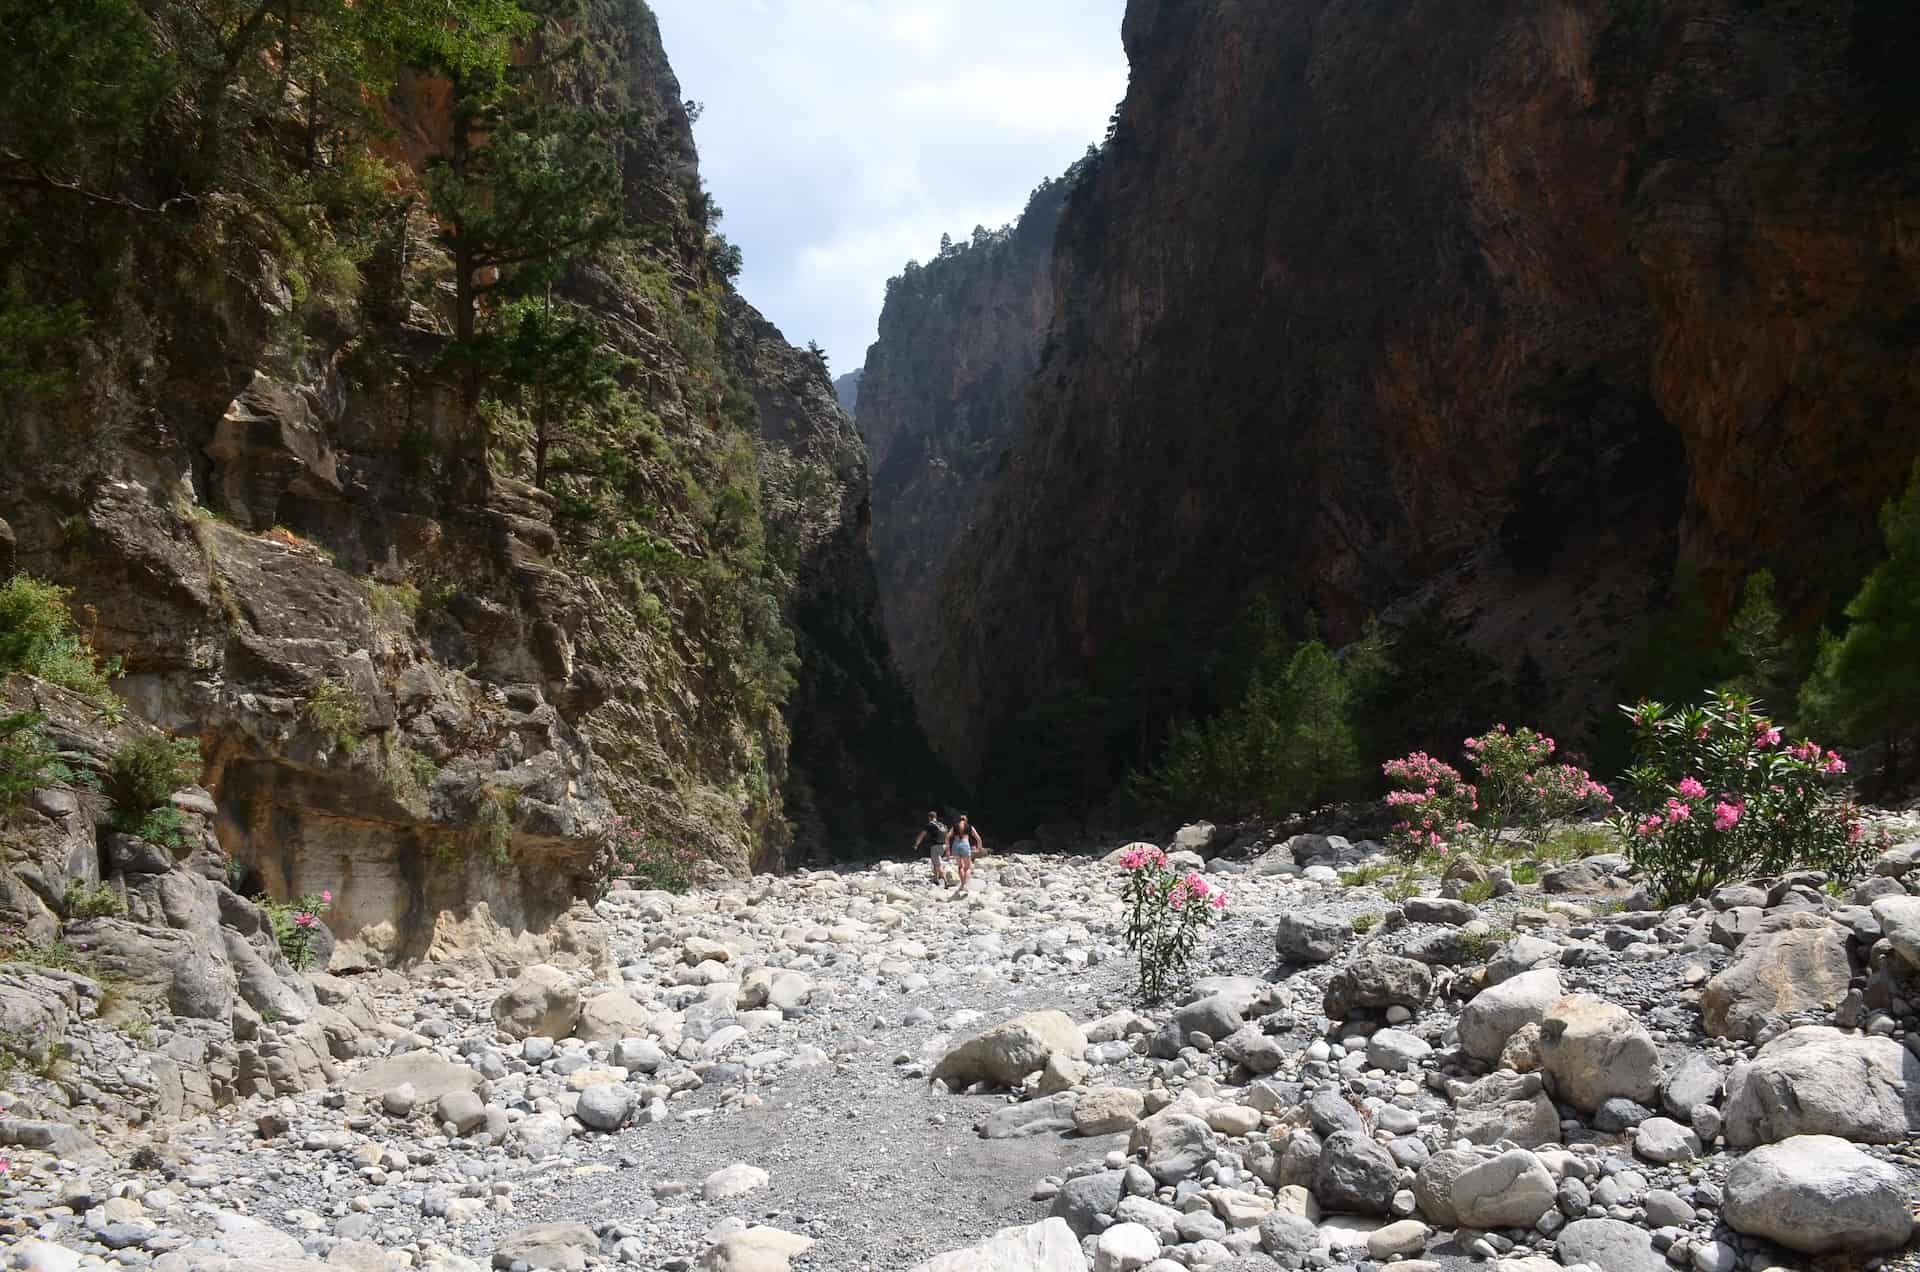 Walking on the riverbed on the trail from Nero tis Perdikas to Christos at the Samaria Gorge in Crete, Greece